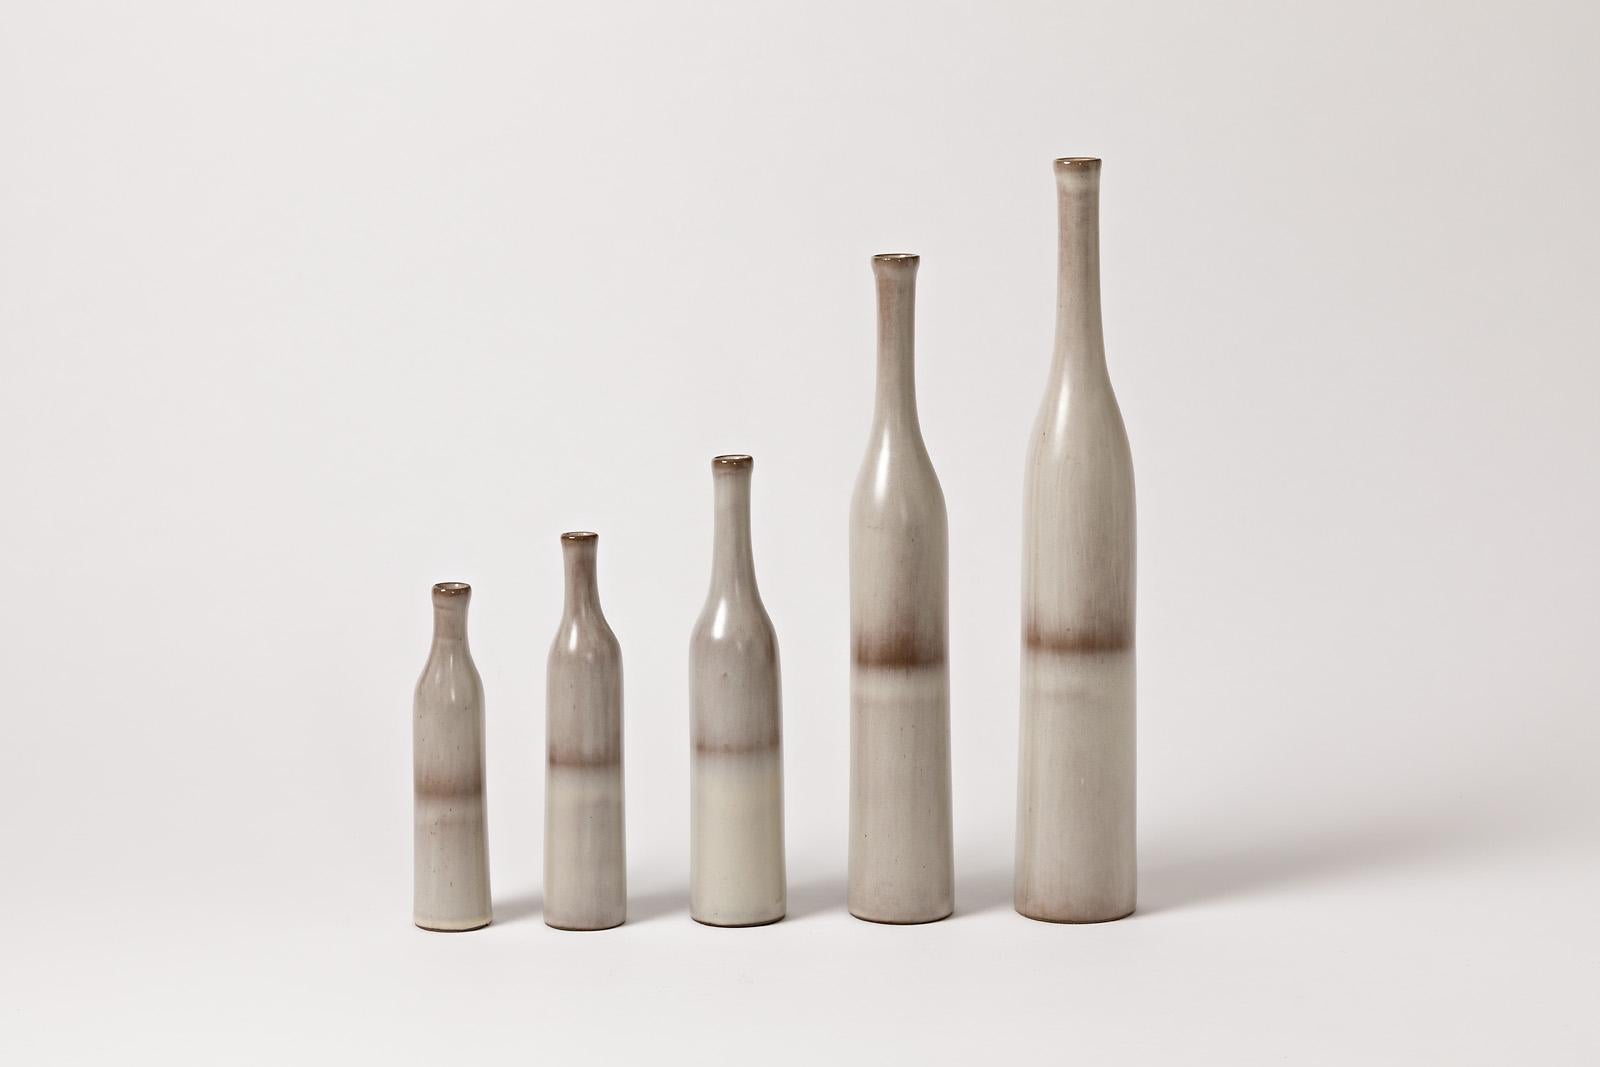 French Set of 5 Ceramic Bottles White and Grey Colors by Ruelland Midcentury Design